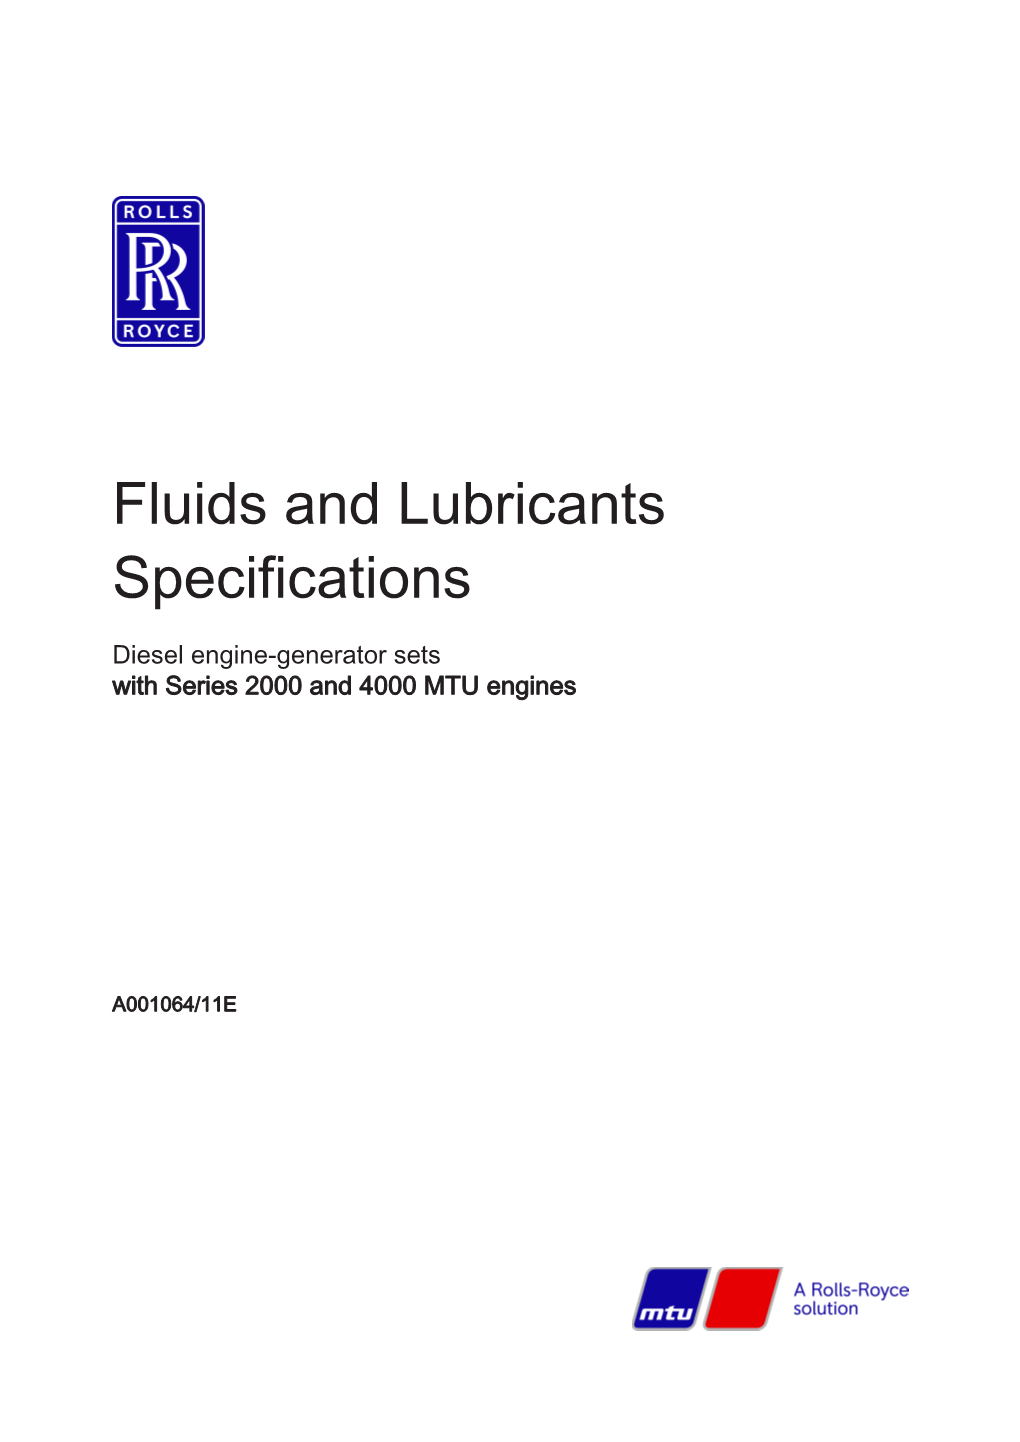 Fluids and Lubricants Specifications Diesel Engine-Generator Sets